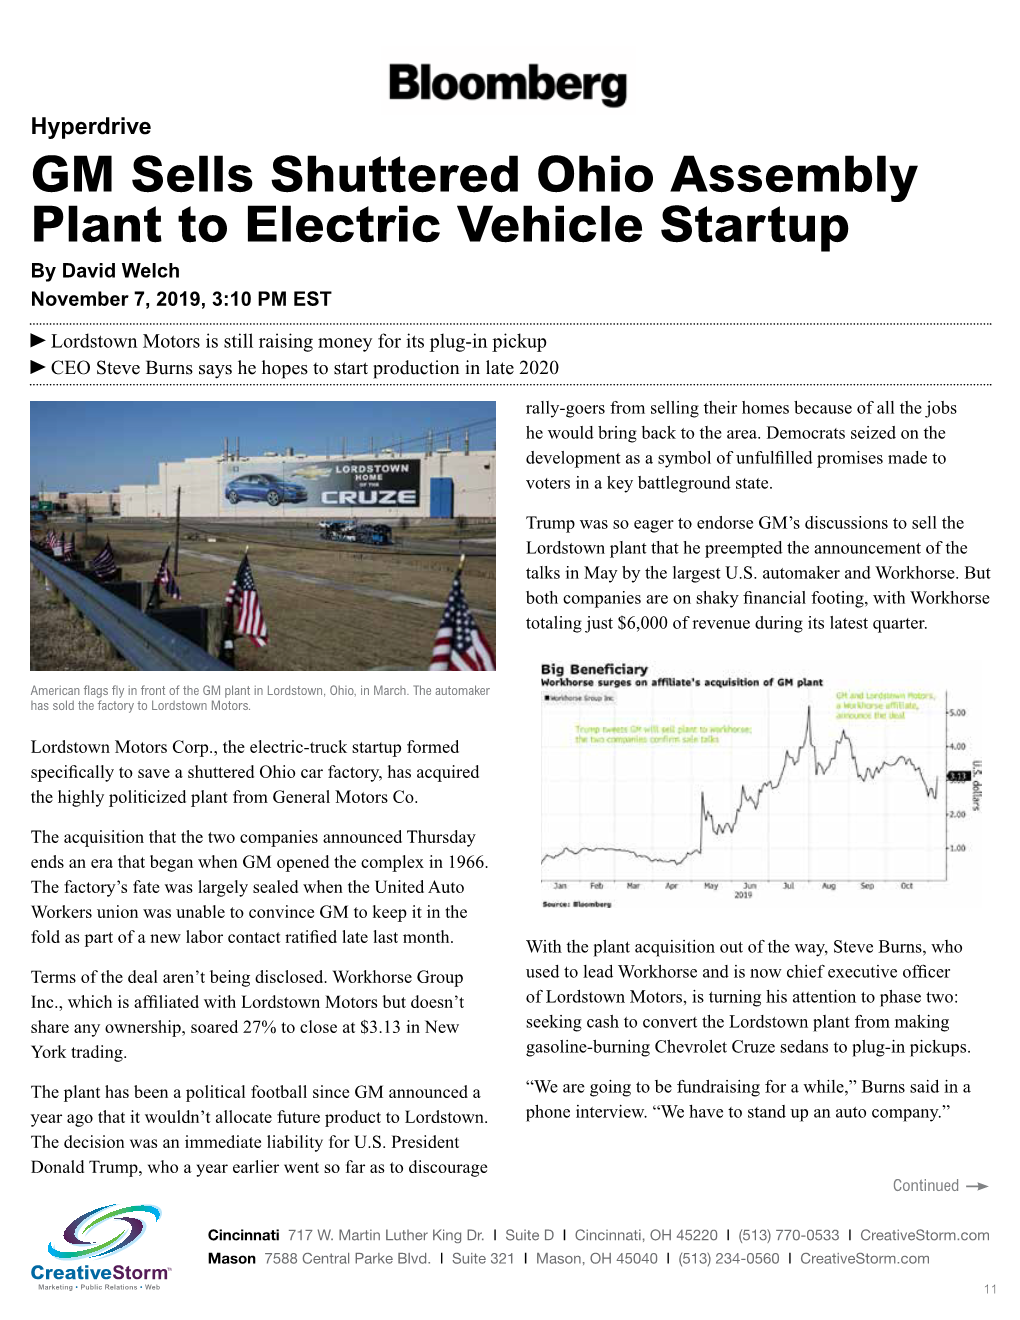 GM Sells Shuttered Ohio Assembly Plant to Electric Vehicle Startup by David Welch November 7, 2019, 3:10 PM EST